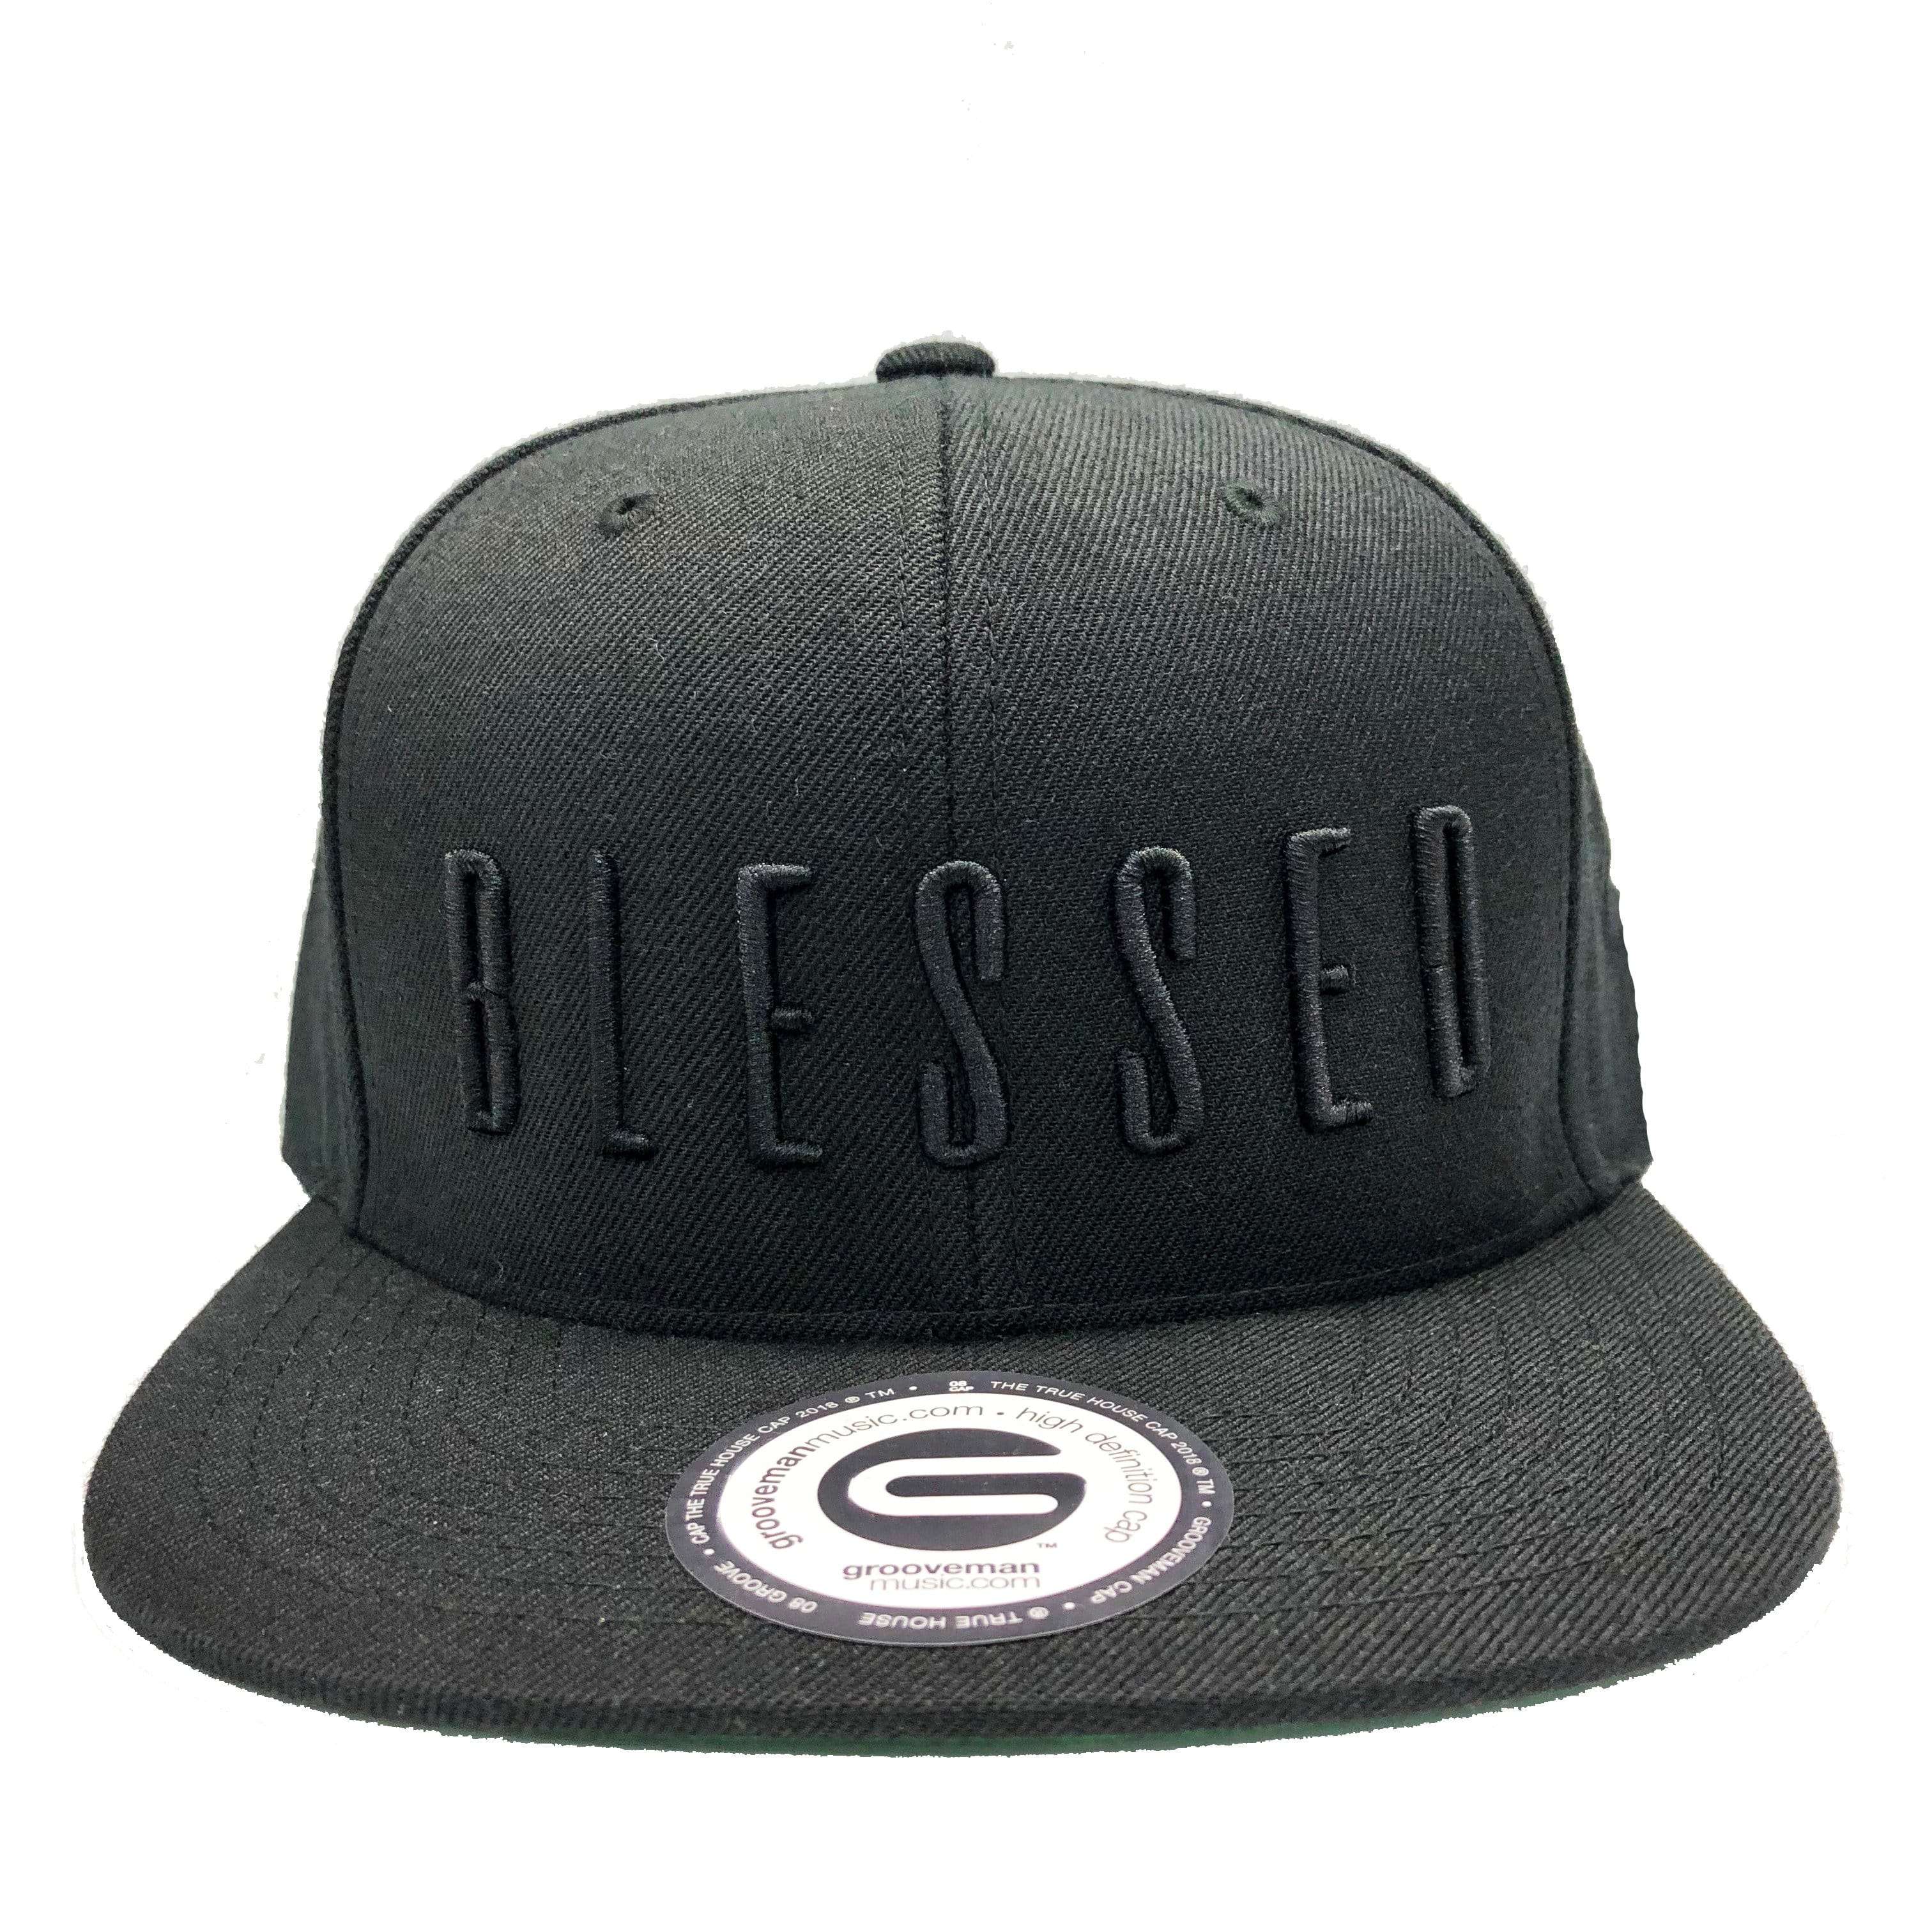 Grooveman Music Hats One Size / Black Blessed Cap